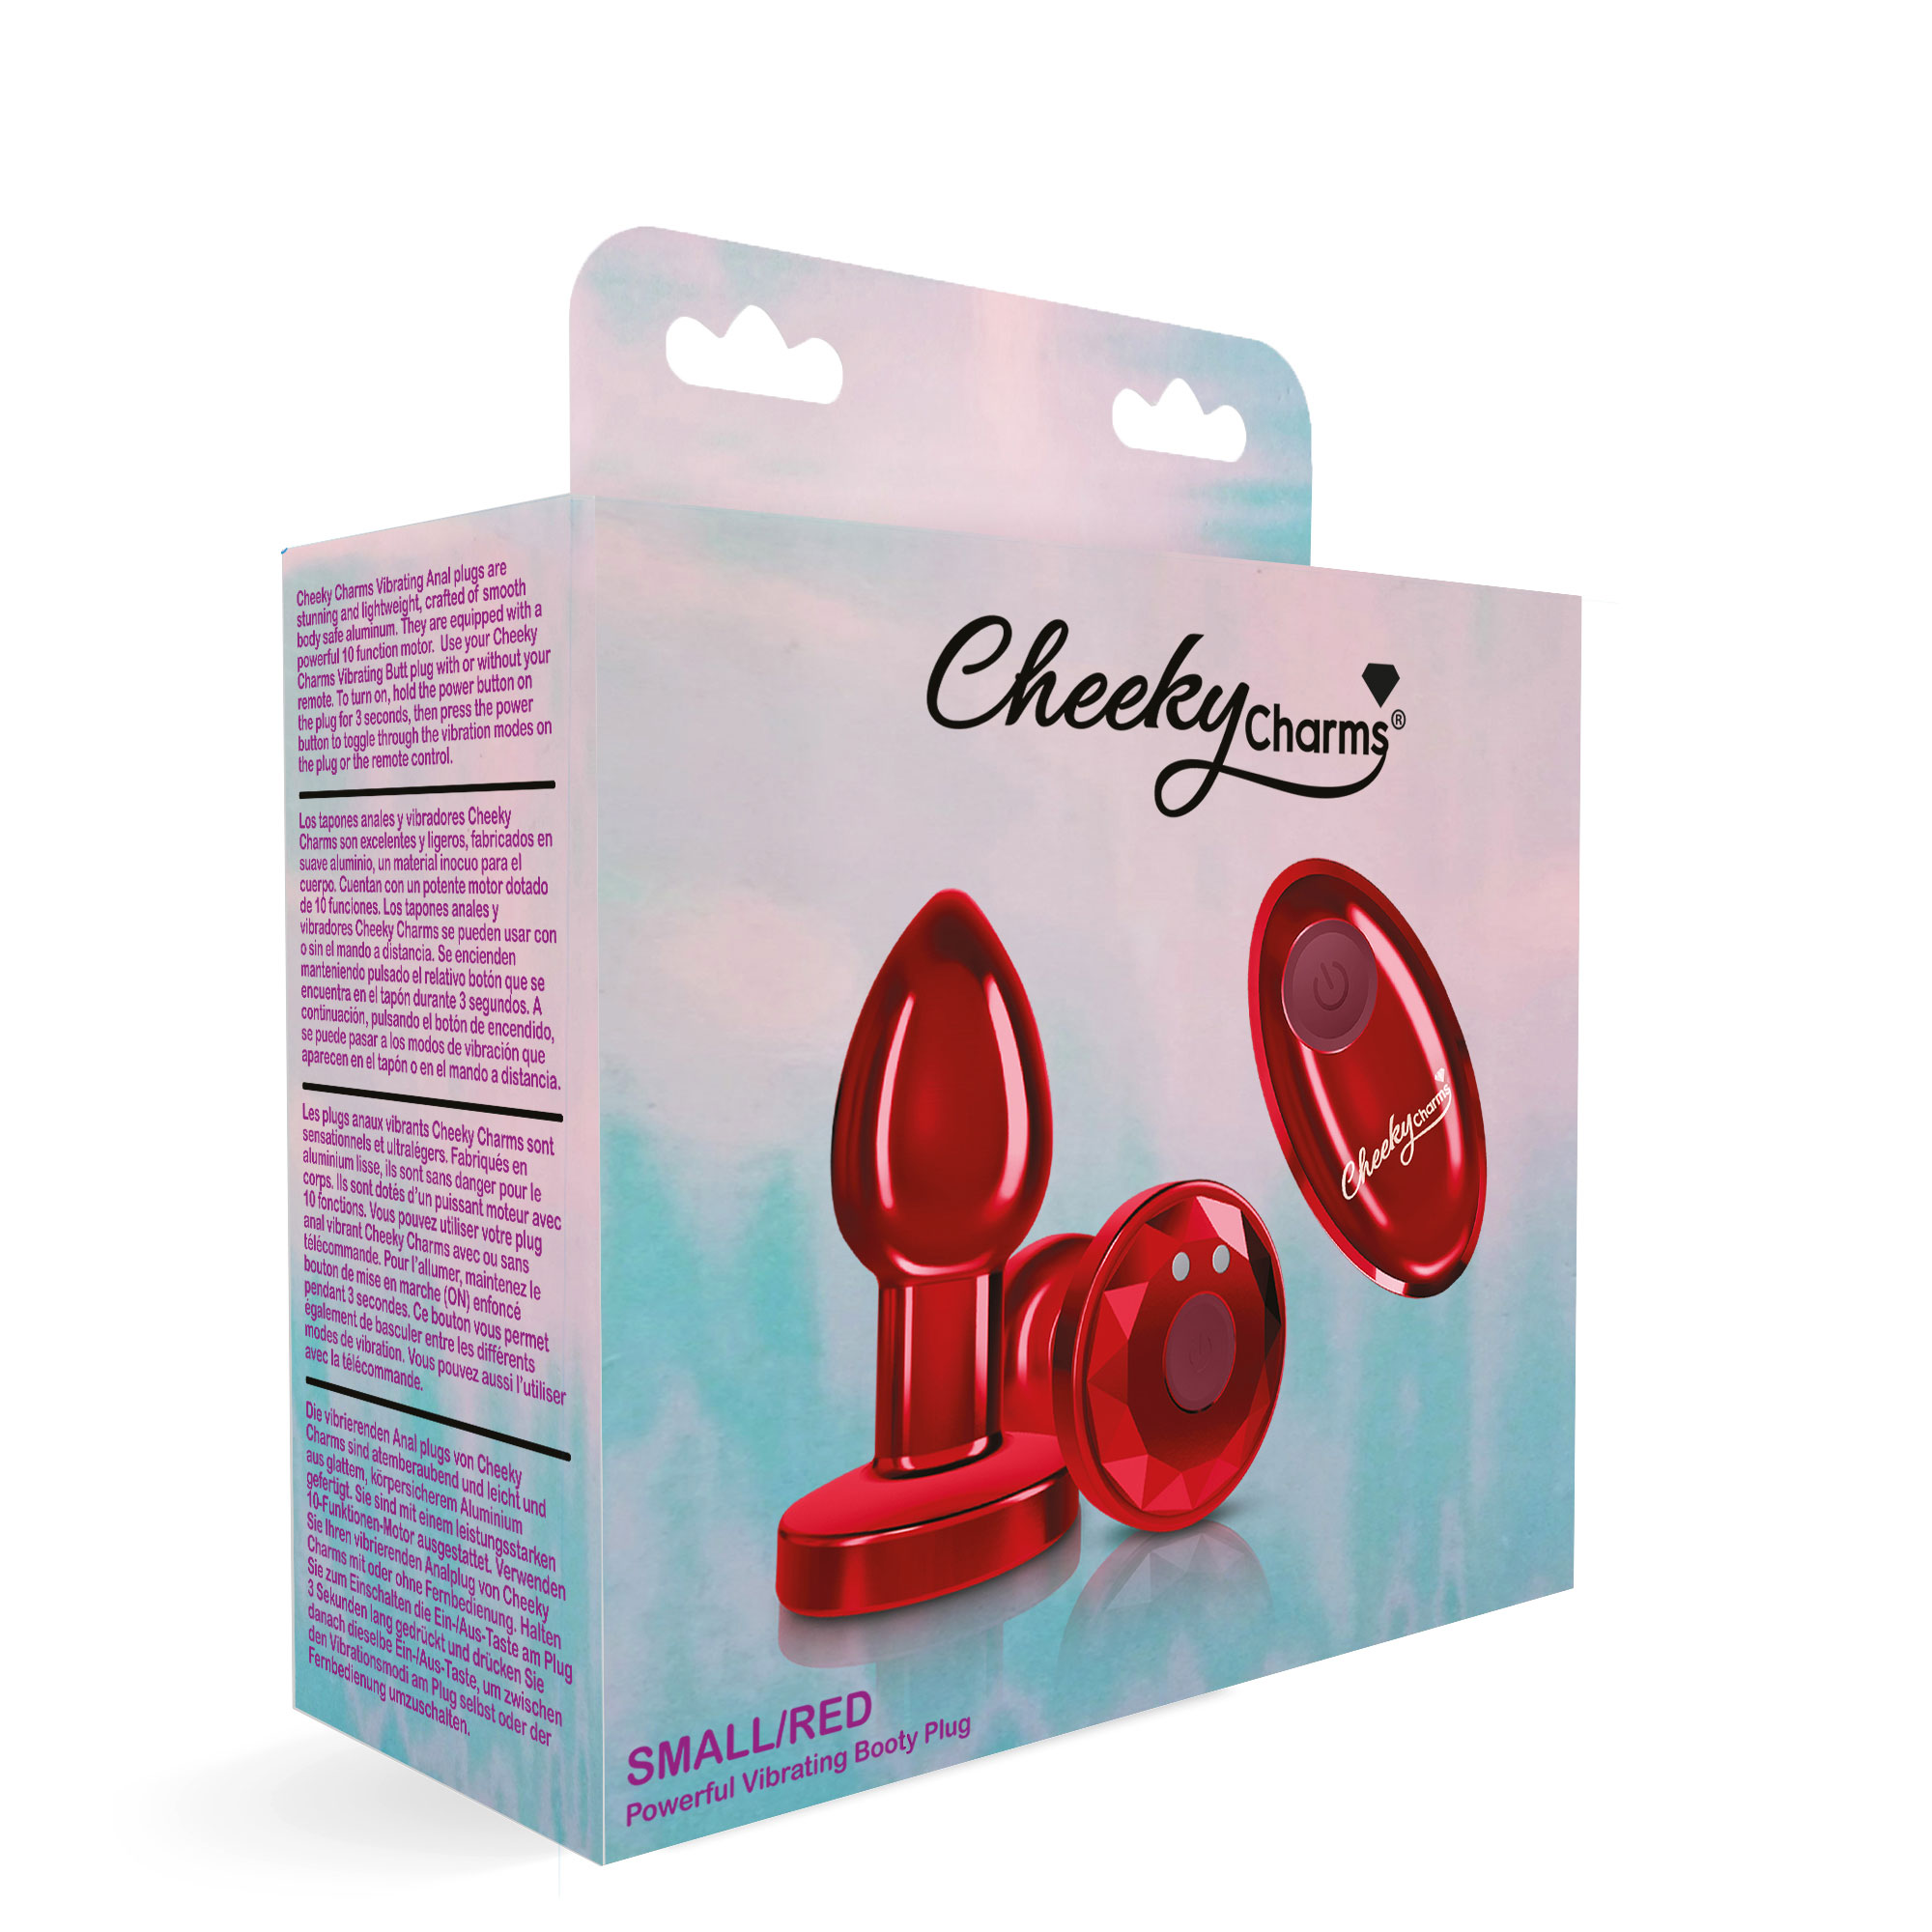 cheeky charms rechargeable vibrating metal butt plug with remote control red small 